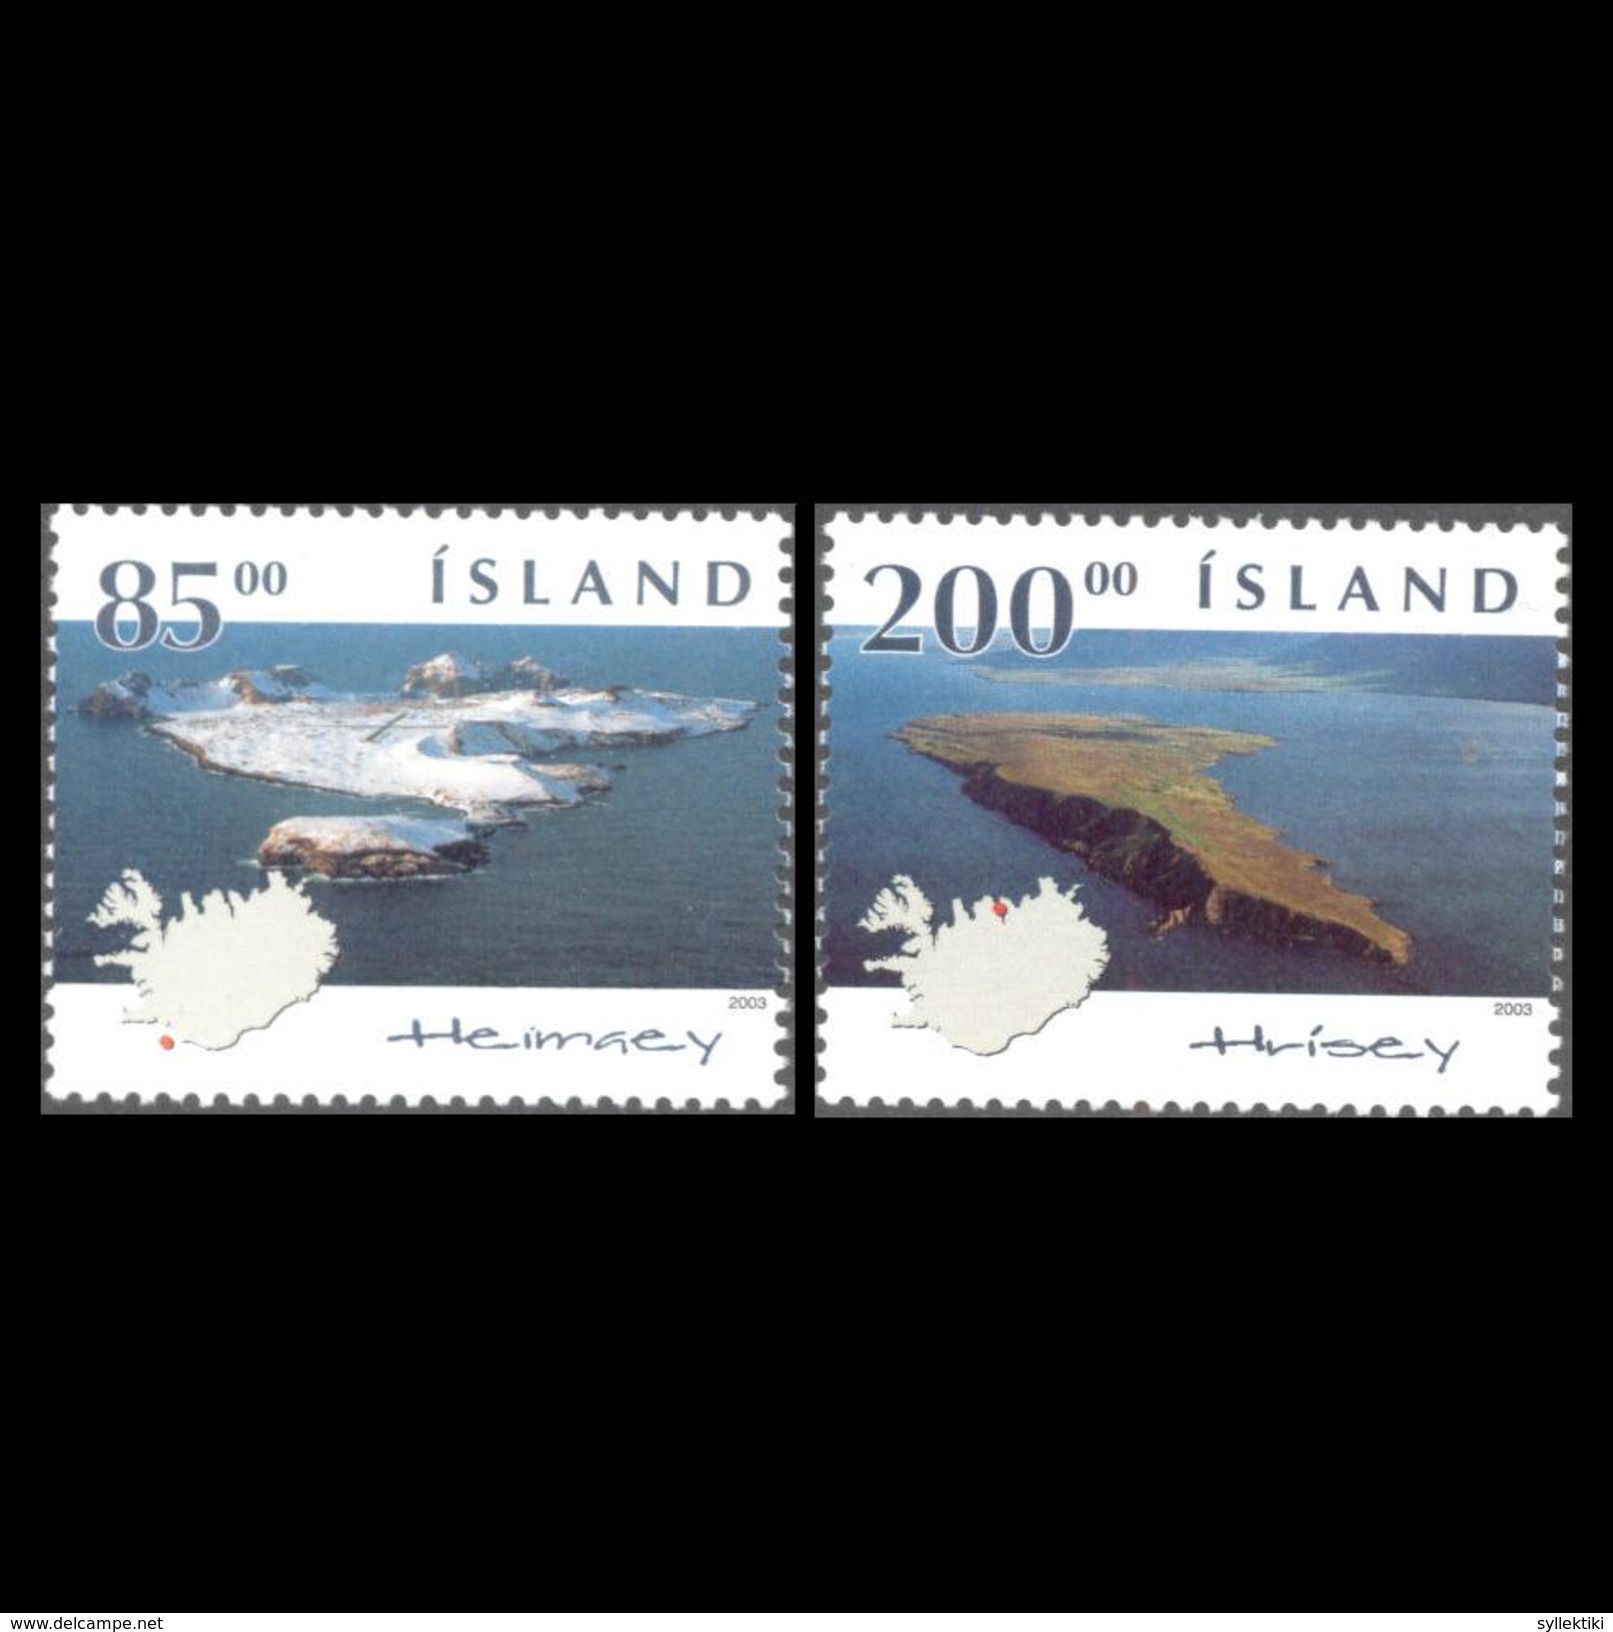 ICELAND 2003 PICTURE OF THE ISLAND MNH SET - Neufs